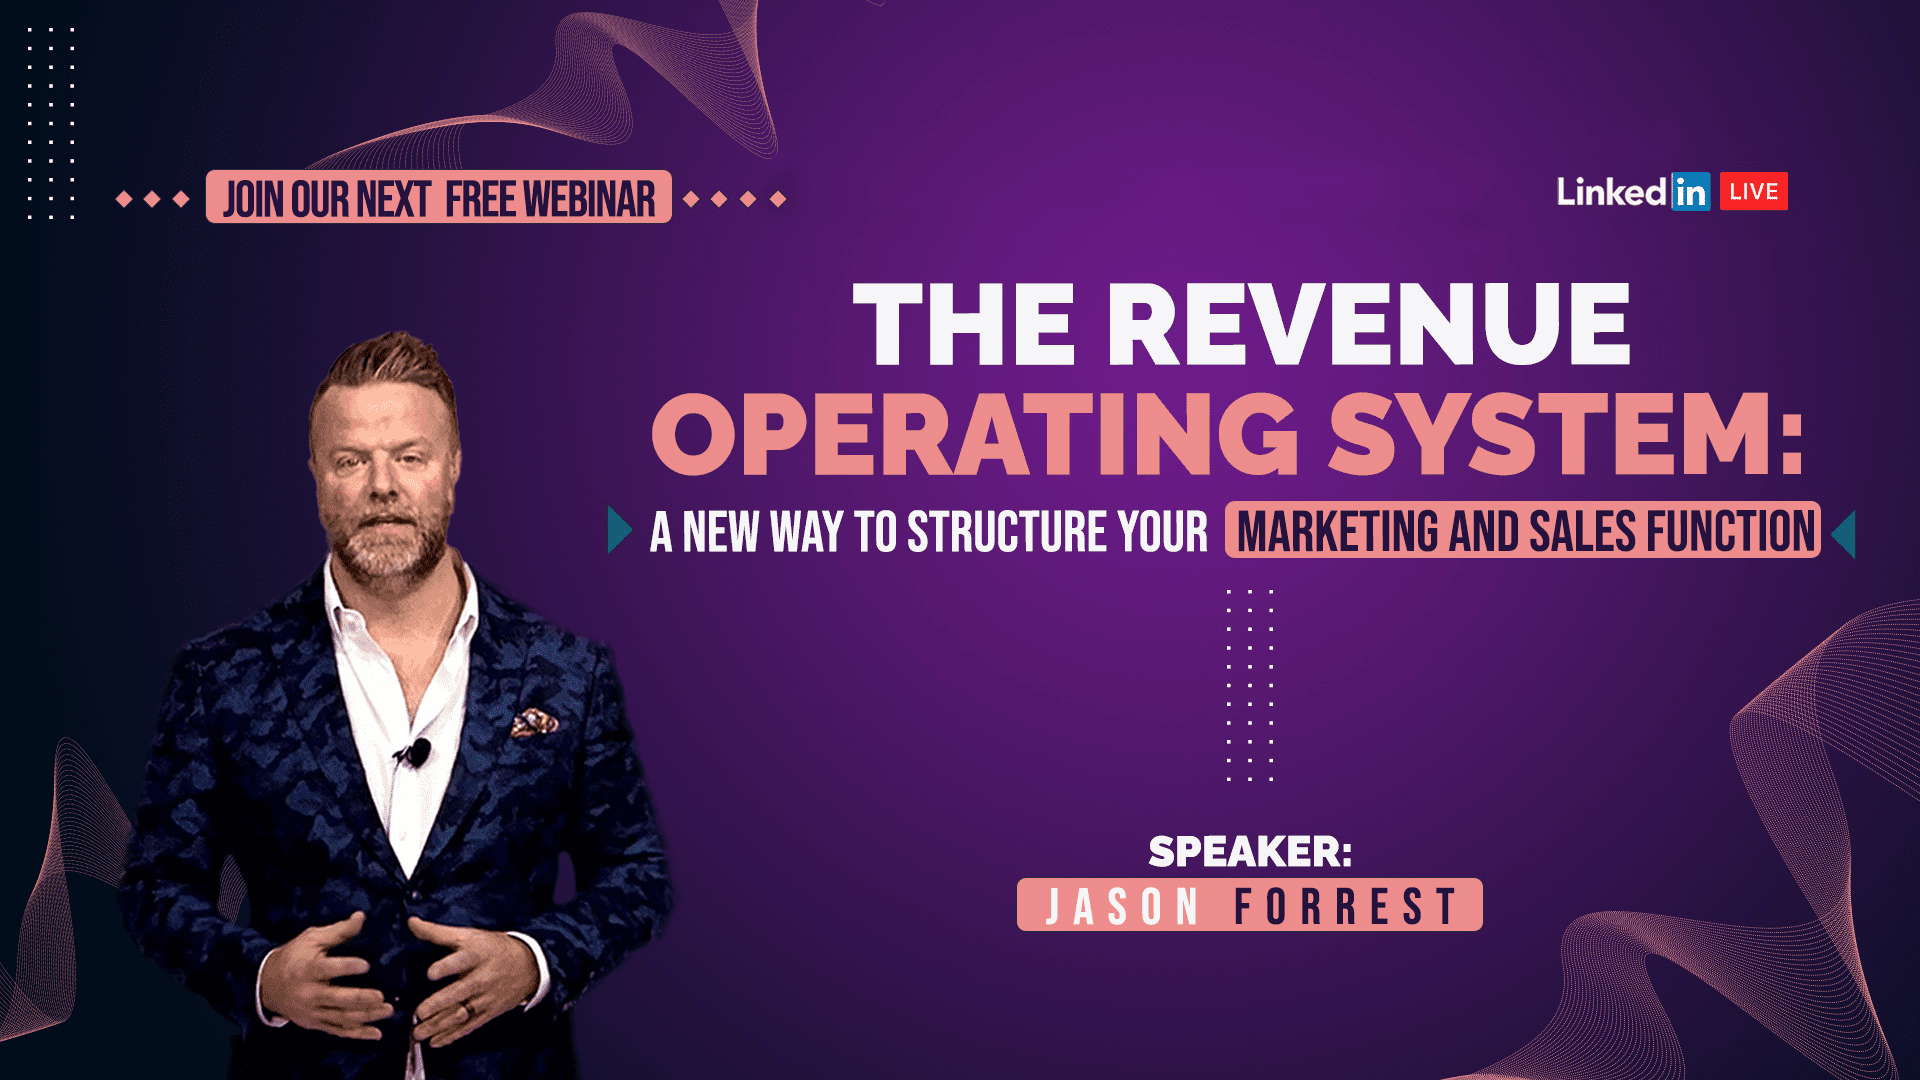 THE-REVENUE-OPERATING-SYSTEM-FPG Revenue Operating System -marketing strategies for small businesses